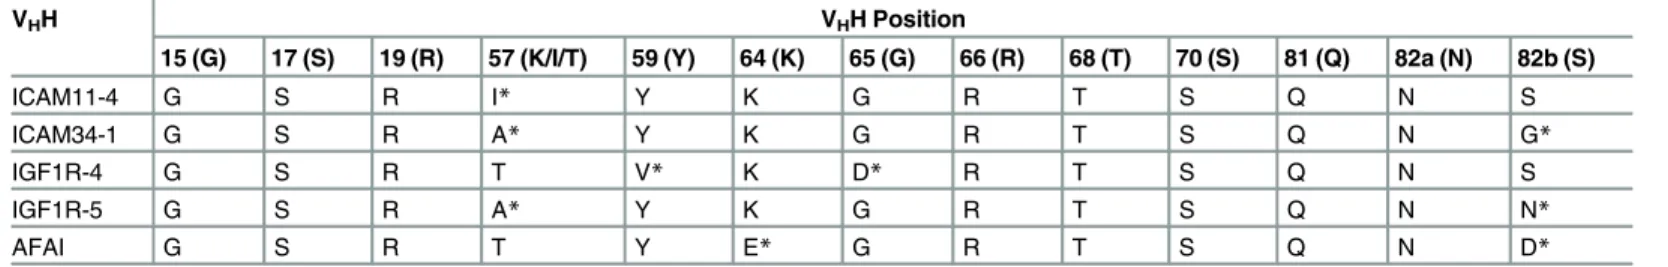 Table 1. FR sequences of five non-SpA-binding V H Hs at SpA contact positions.